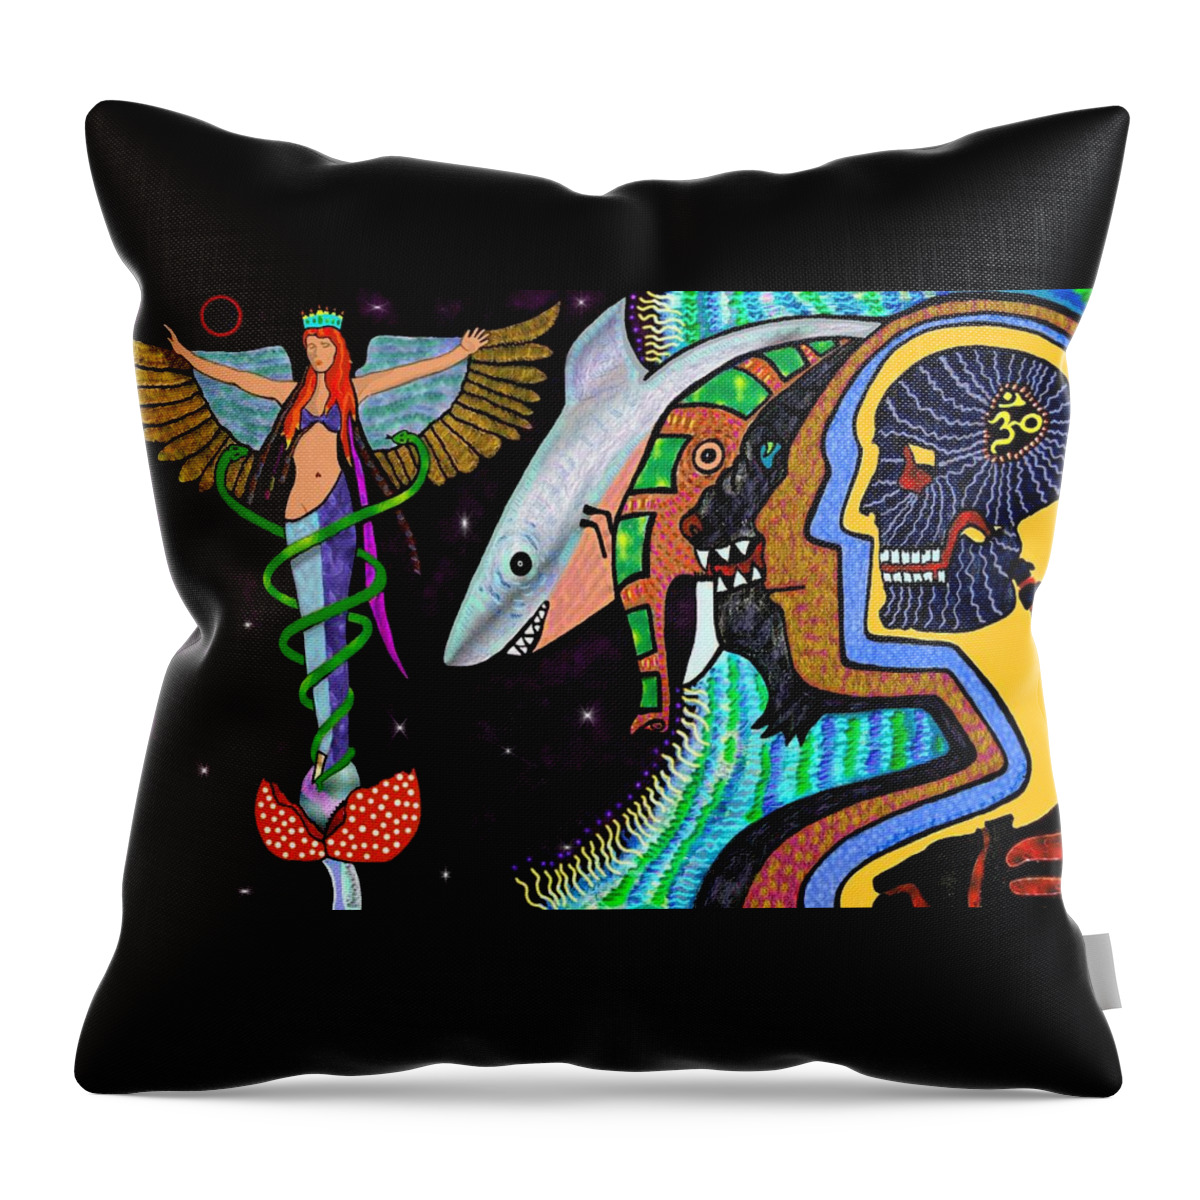 Visionary_art Throw Pillow featuring the painting Eternal Web of Consciousness by Myztico Campo